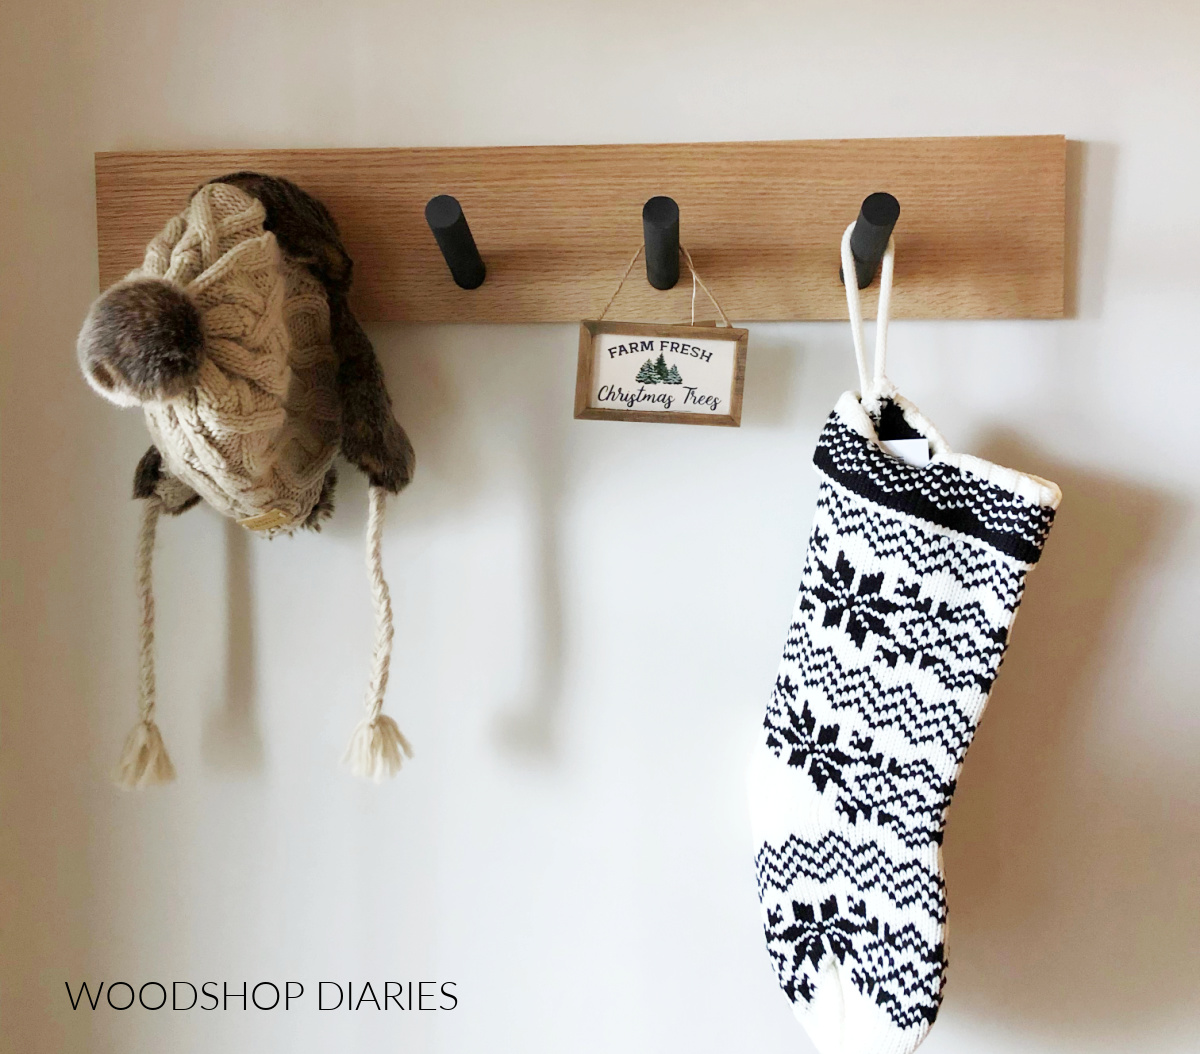 Easy scrap wood stocking hanger made with a single board and some dowels